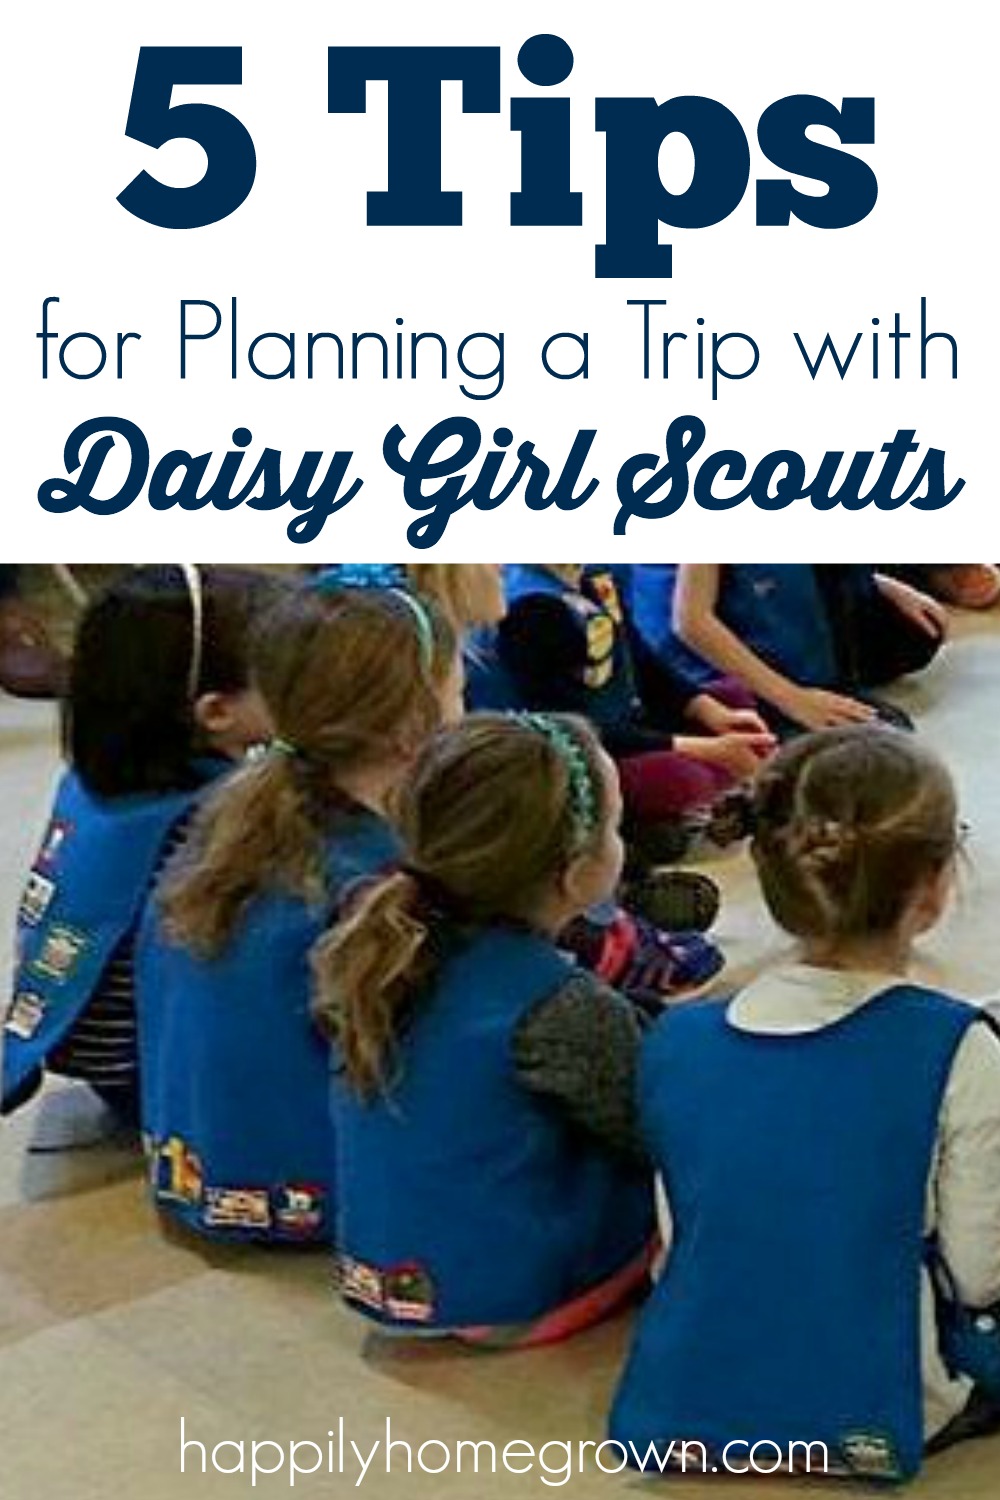 Girl Scouts is about teaching decision making & leadership skills, even to Daisy Girl Scouts. Here are 5 Tips for planning a trip with your Daisy Troop!